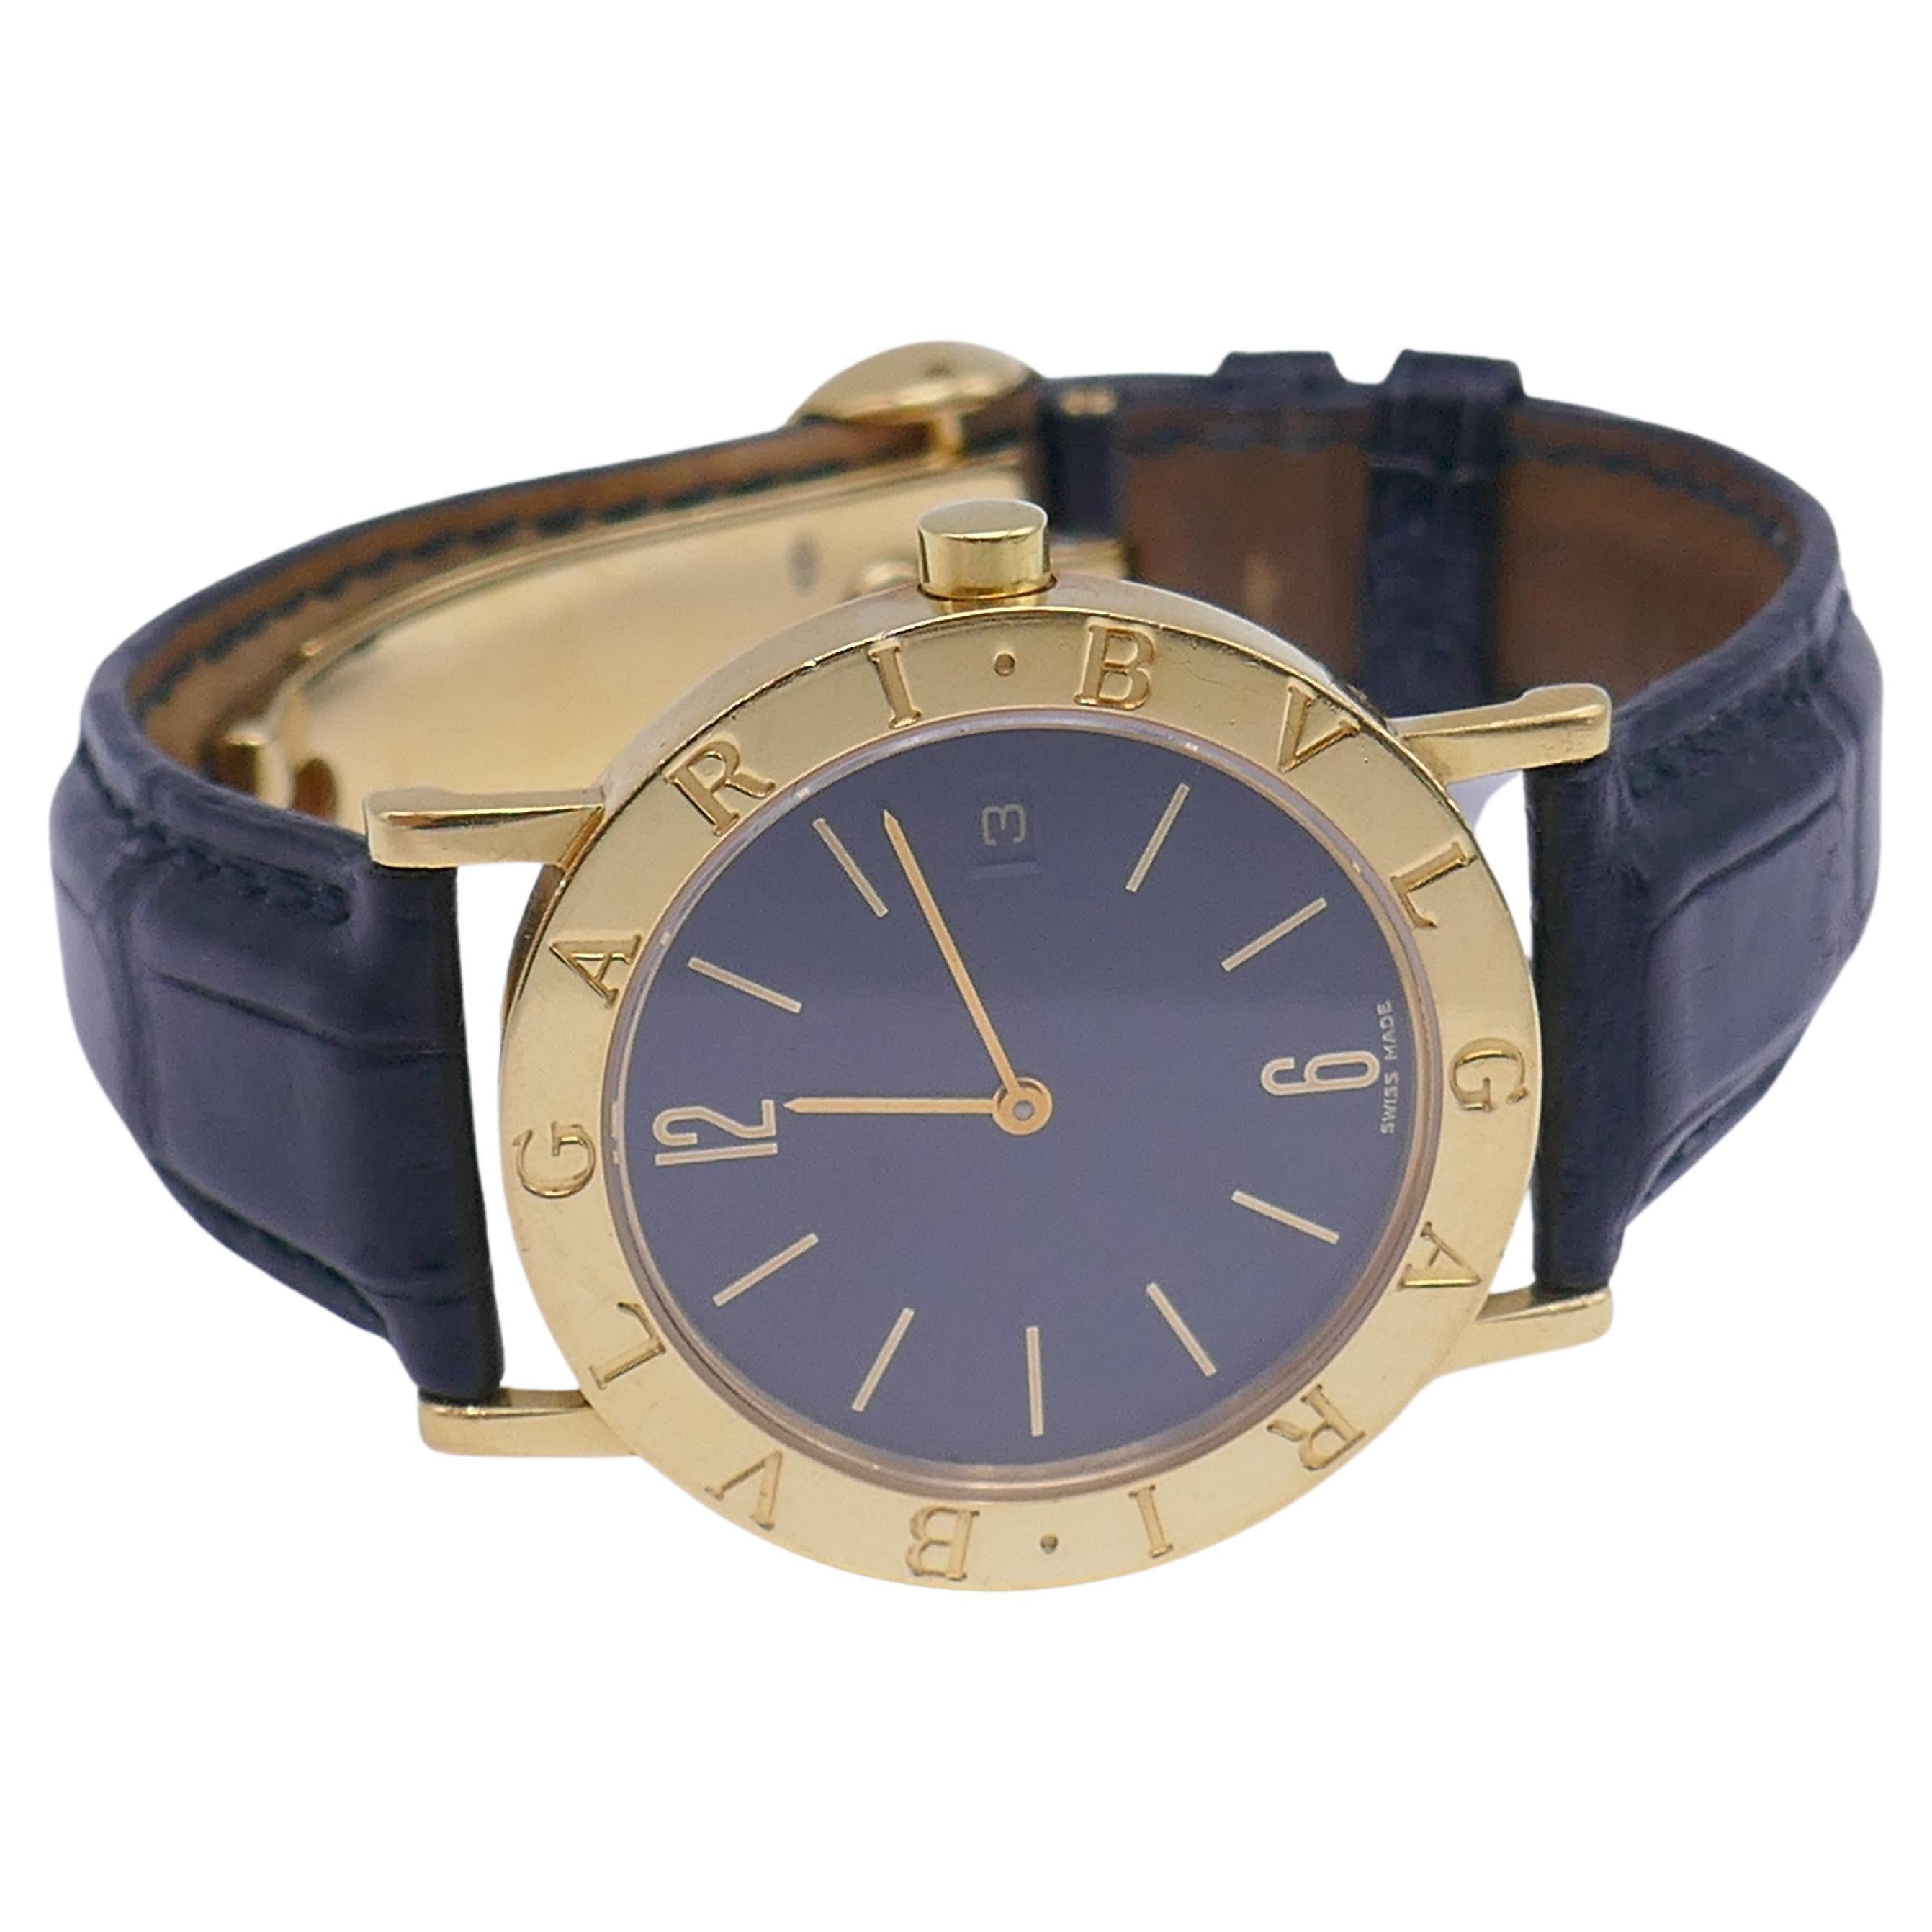 A classic Bulgari BB33 unisex wristwatch made of 18k yellow gold. Features a leather strap with a deployment buckle. Has a Swiss quartz movement. Stamped with Bulgari maker's mark, a model and serial number and a country of origin (Switzerland). The